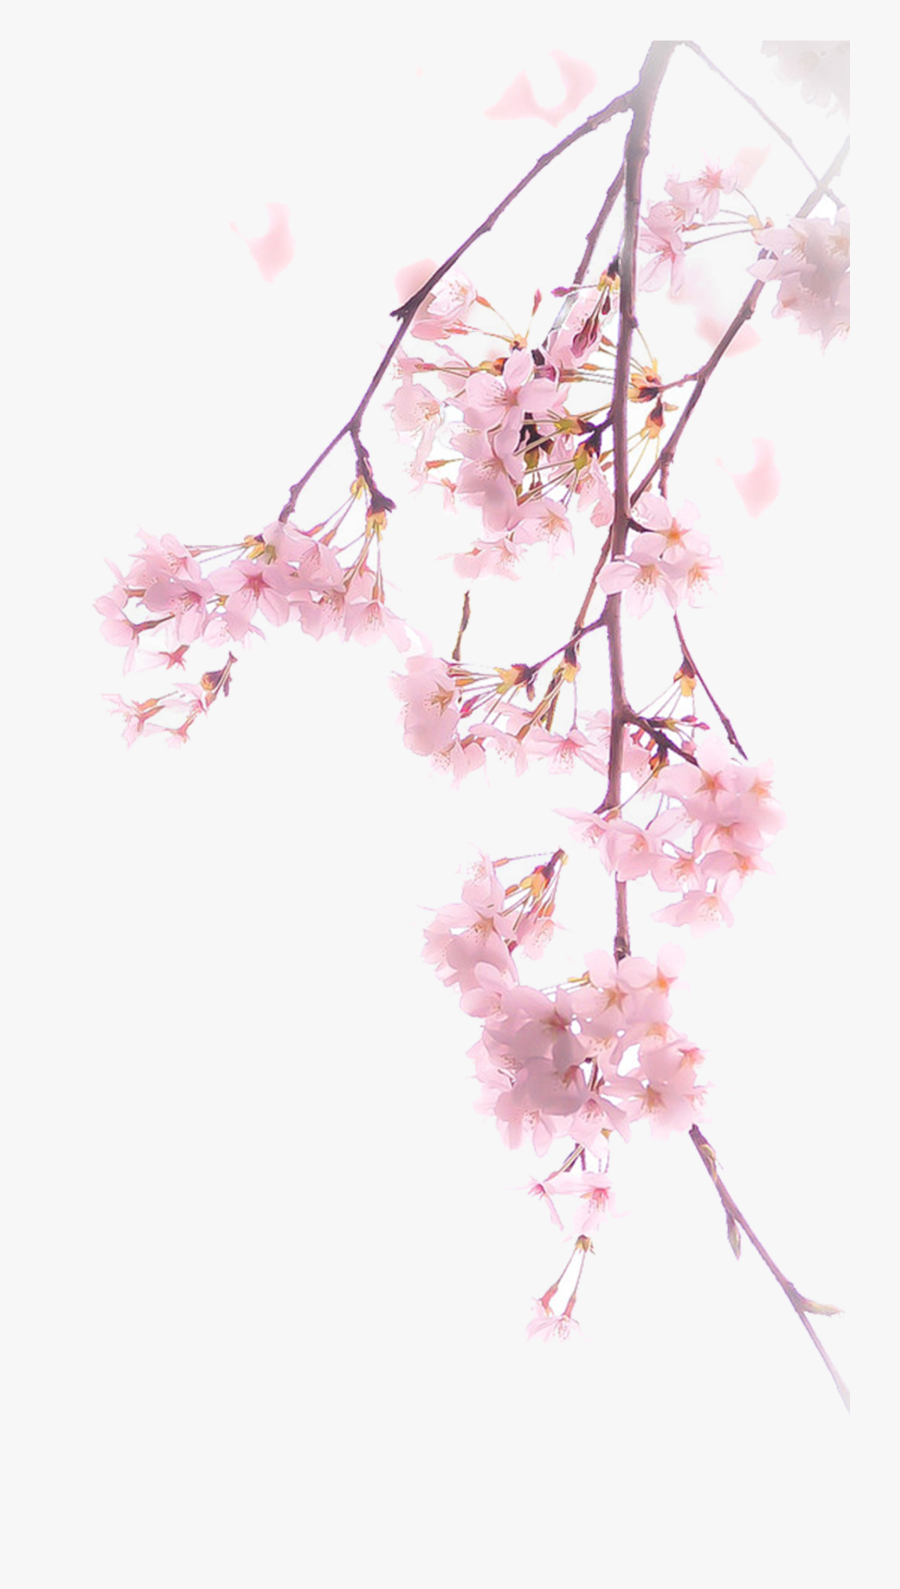 Blossom Cherry Illustration Free Download Png Hq Clipart - Cherry Blossom Tree Png, Transparent Clipart